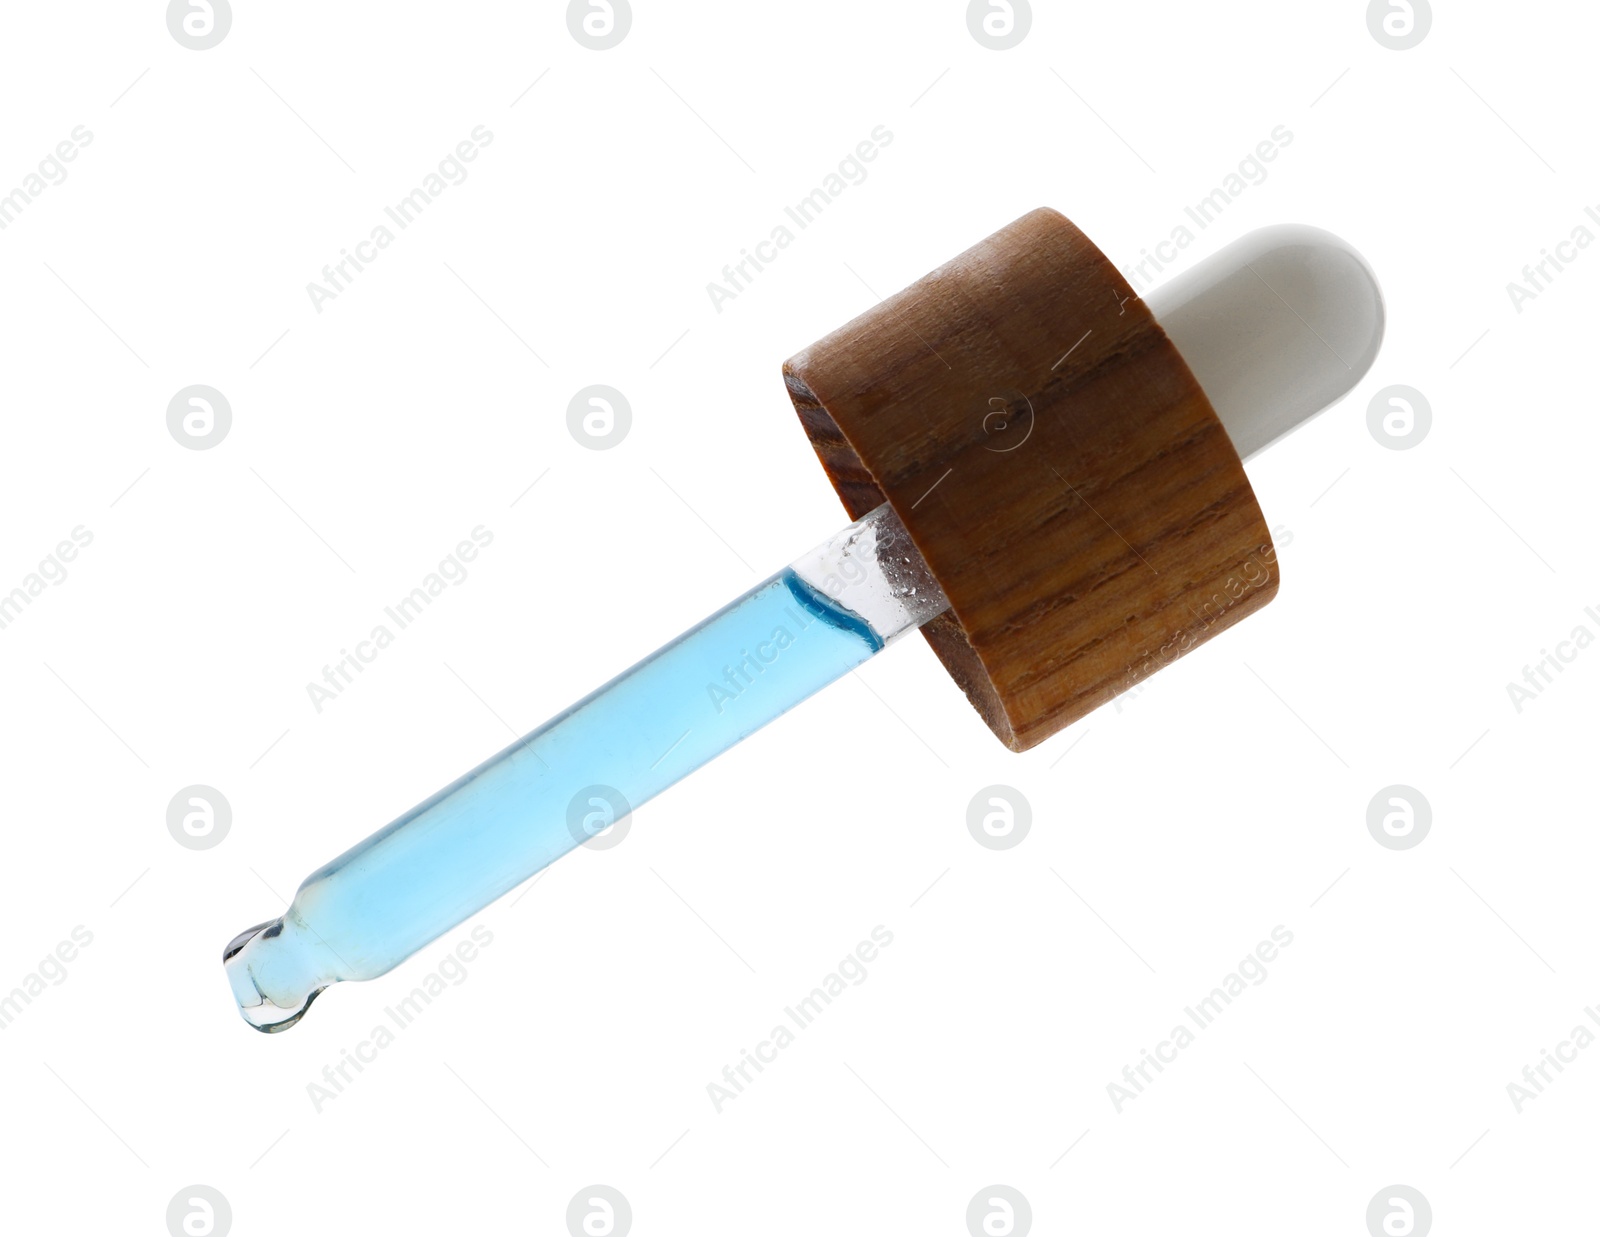 Photo of Pipette with face serum isolated on white